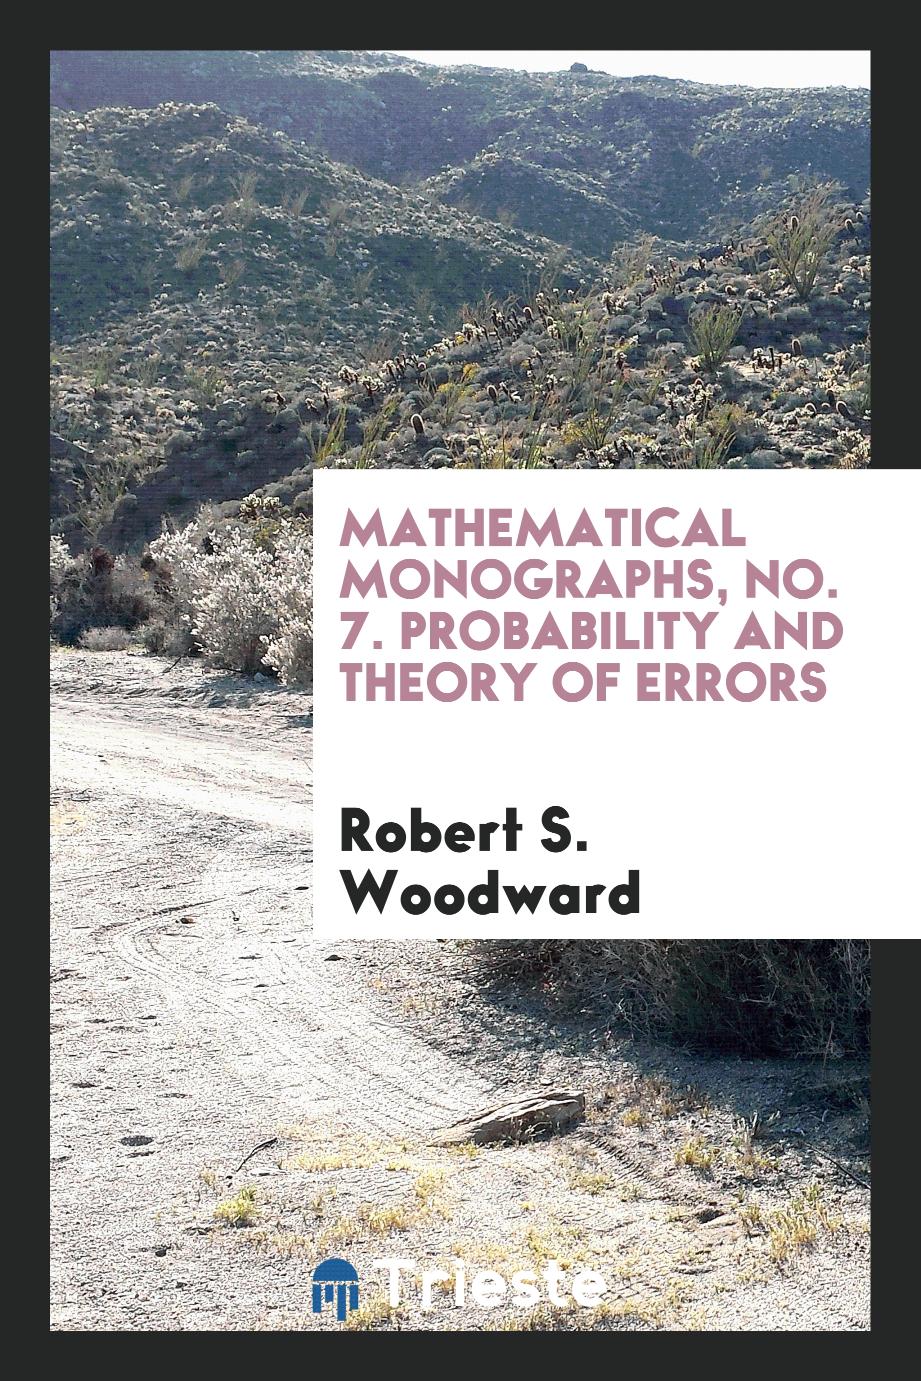 Mathematical monographs, No. 7. Probability and Theory of Errors